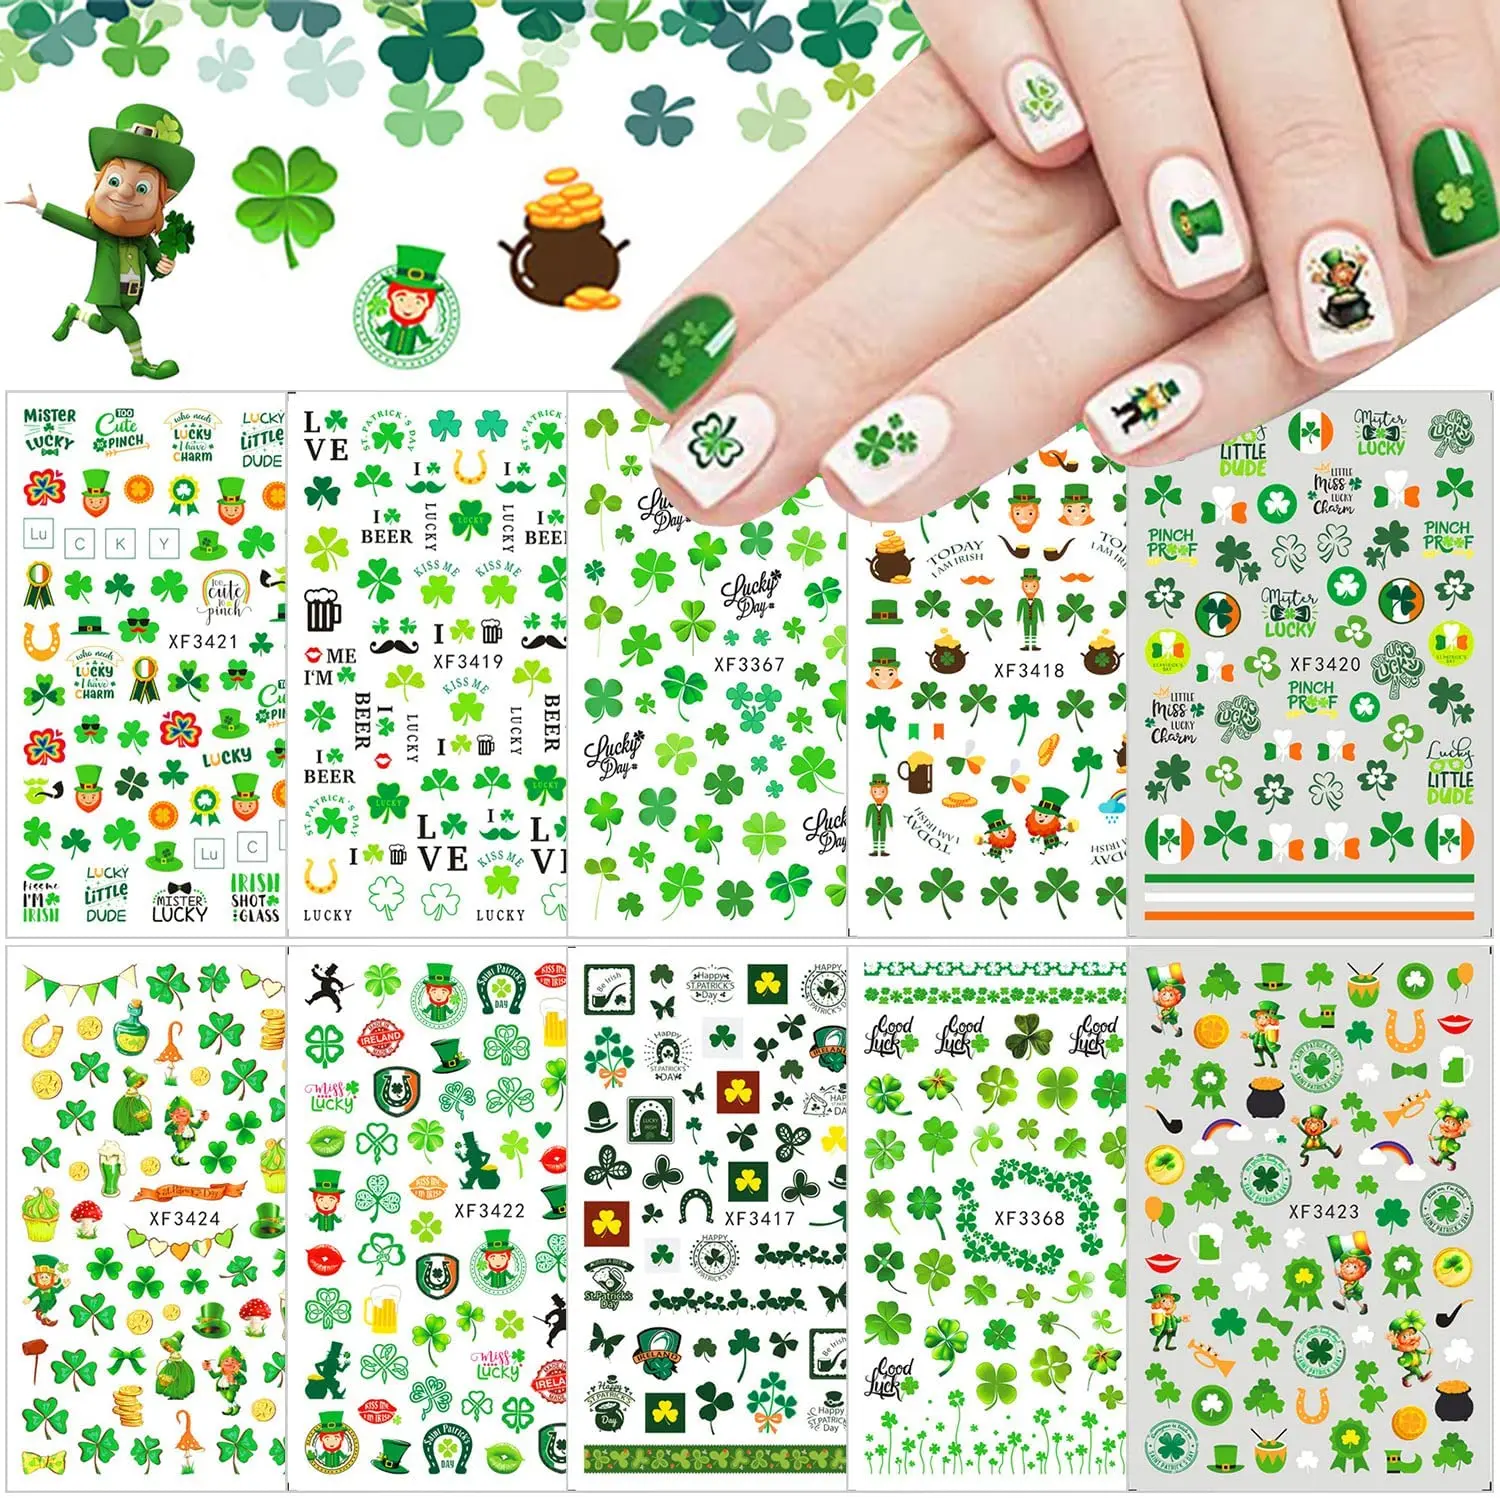 10 Sheets St Patrick’s Day Nail Art Stickers 3D Shamrock Nail Polish Decals Green Clover Irish Nail Stickers St Patricks Day 50pcs irish day stickers st patrick s day clover four leaf clover stickers decoration suitcase stickers baby shower